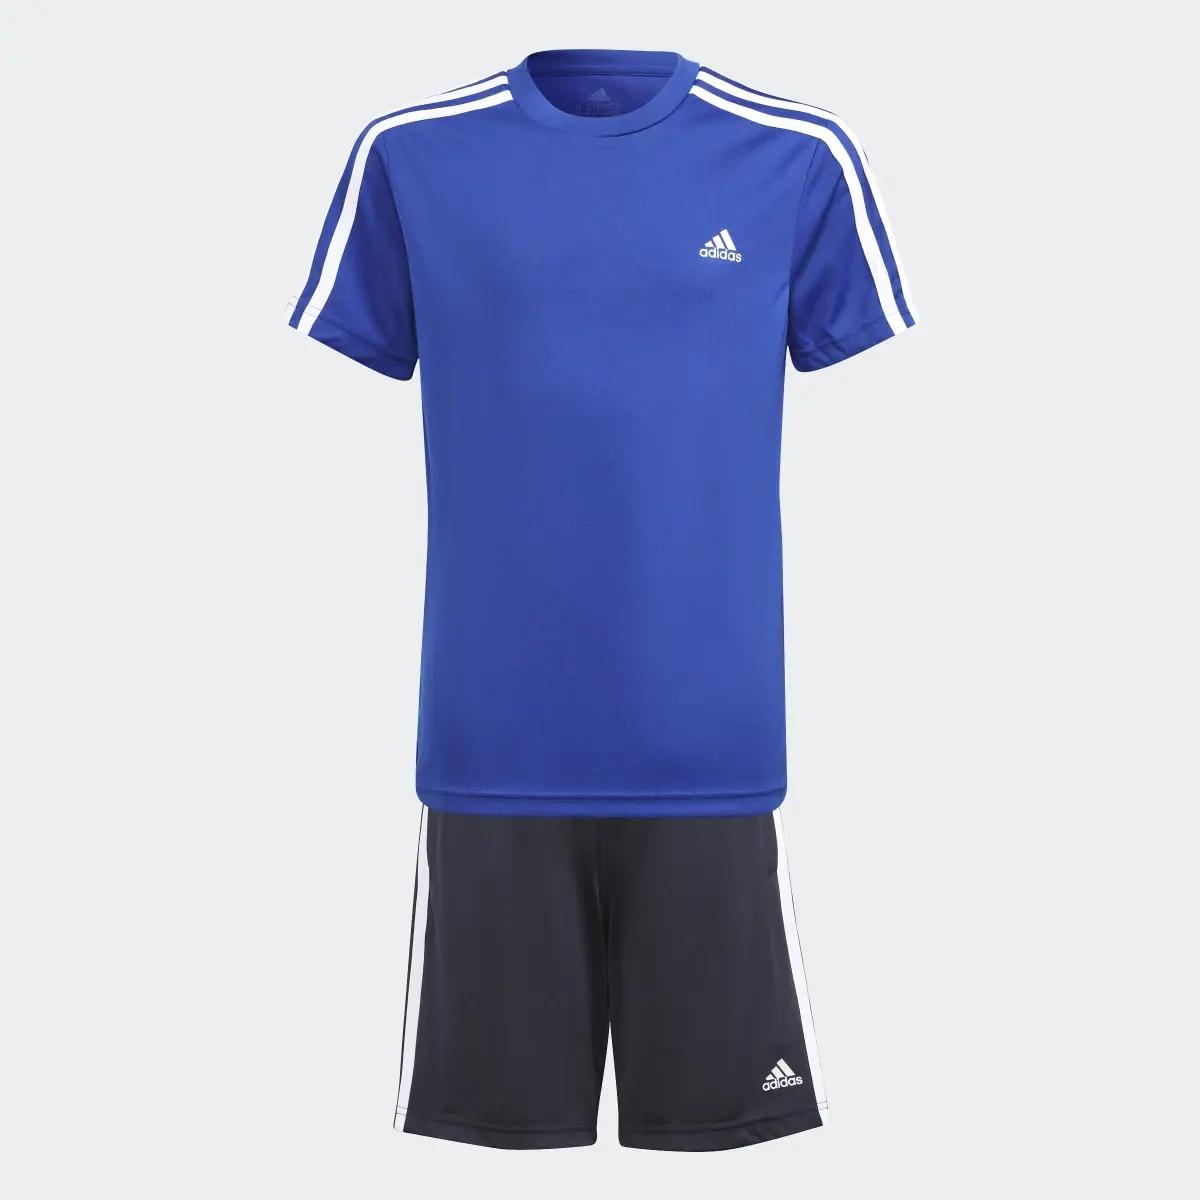 Adidas DESIGNED TO MOVE TEE AND SHORTS SET. 1